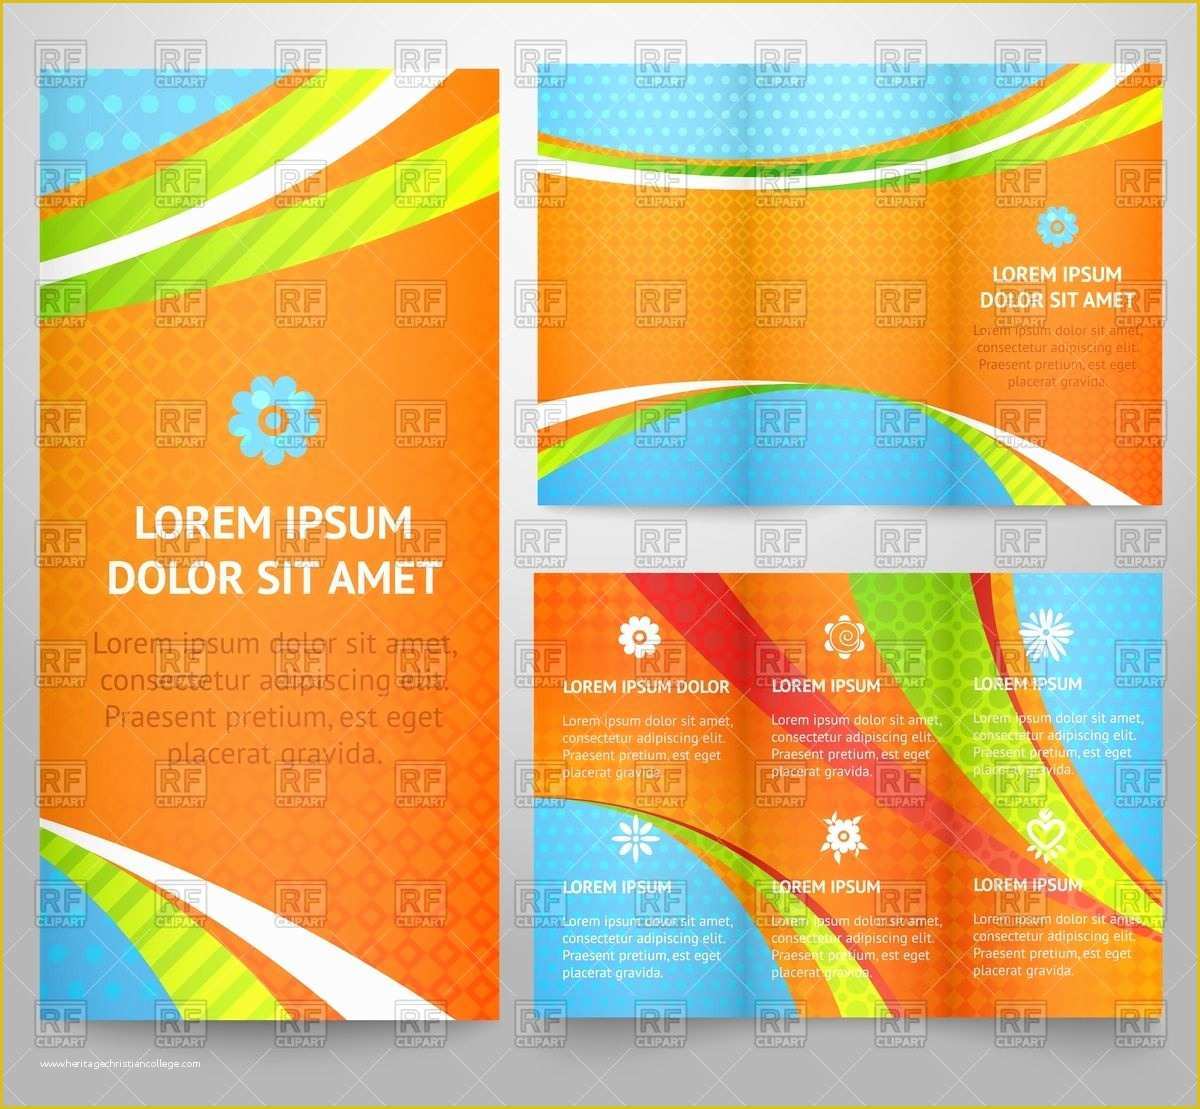 Royalty Free Flyer Templates Of Template Of Tri Fold Brochure or Flyer with Abstract